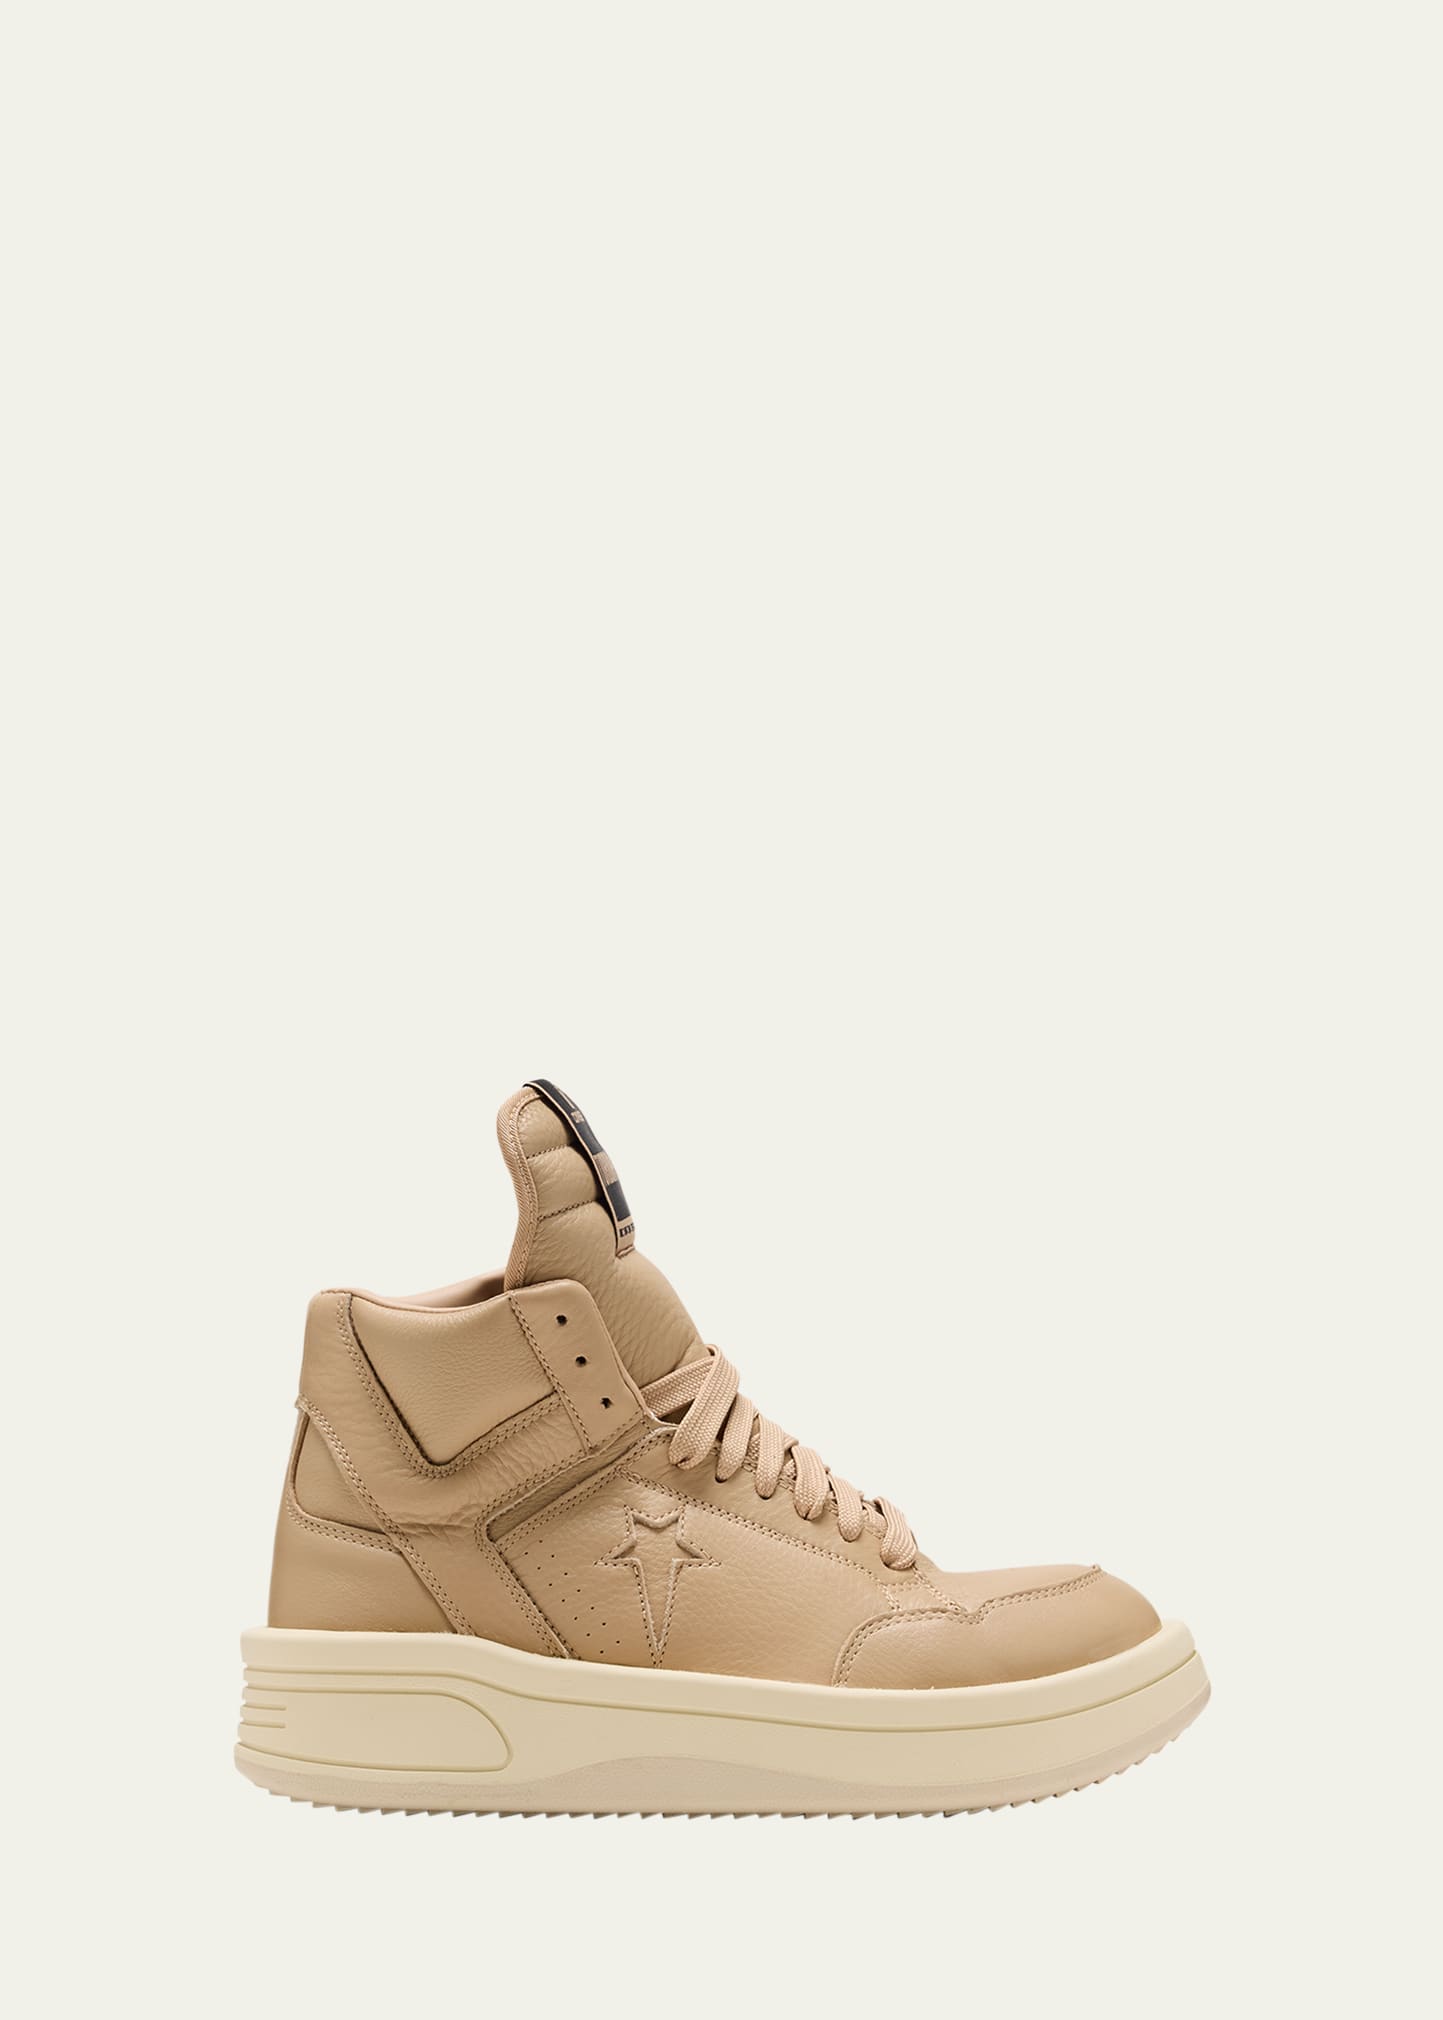 X DRKSHDW Leather High-Top Sneakers